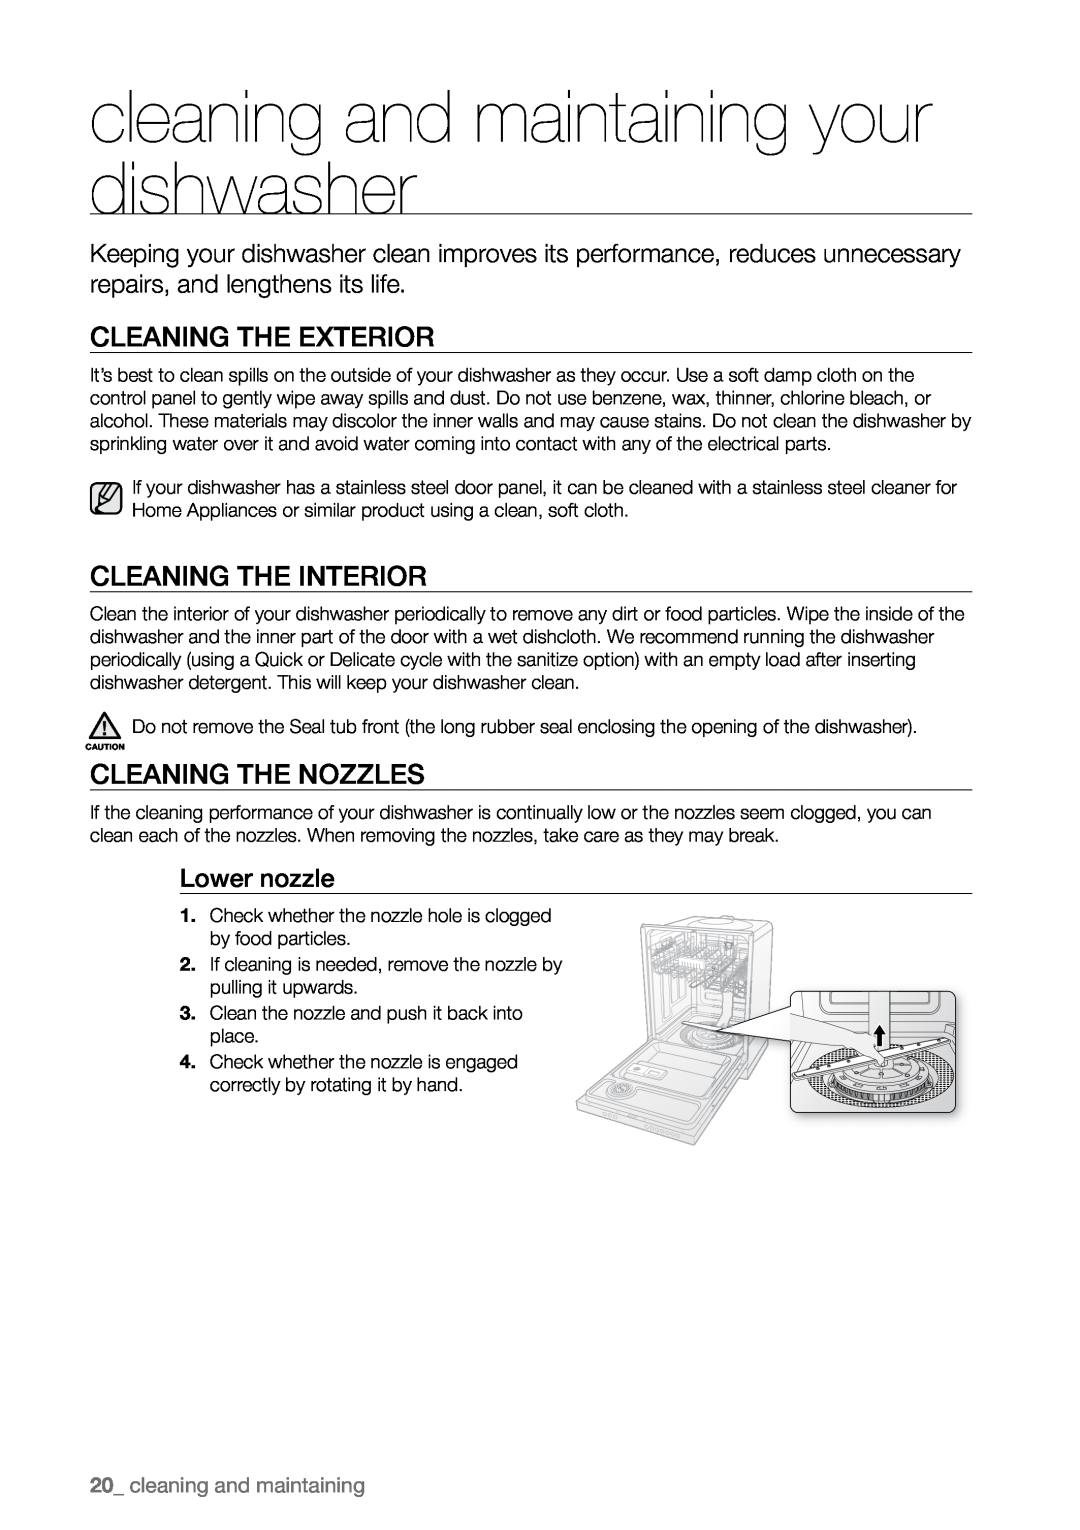 Samsung DMRLHB cleaning and maintaining your dishwasher, Cleaning the exterior, Cleaning the interior, Lower nozzle 